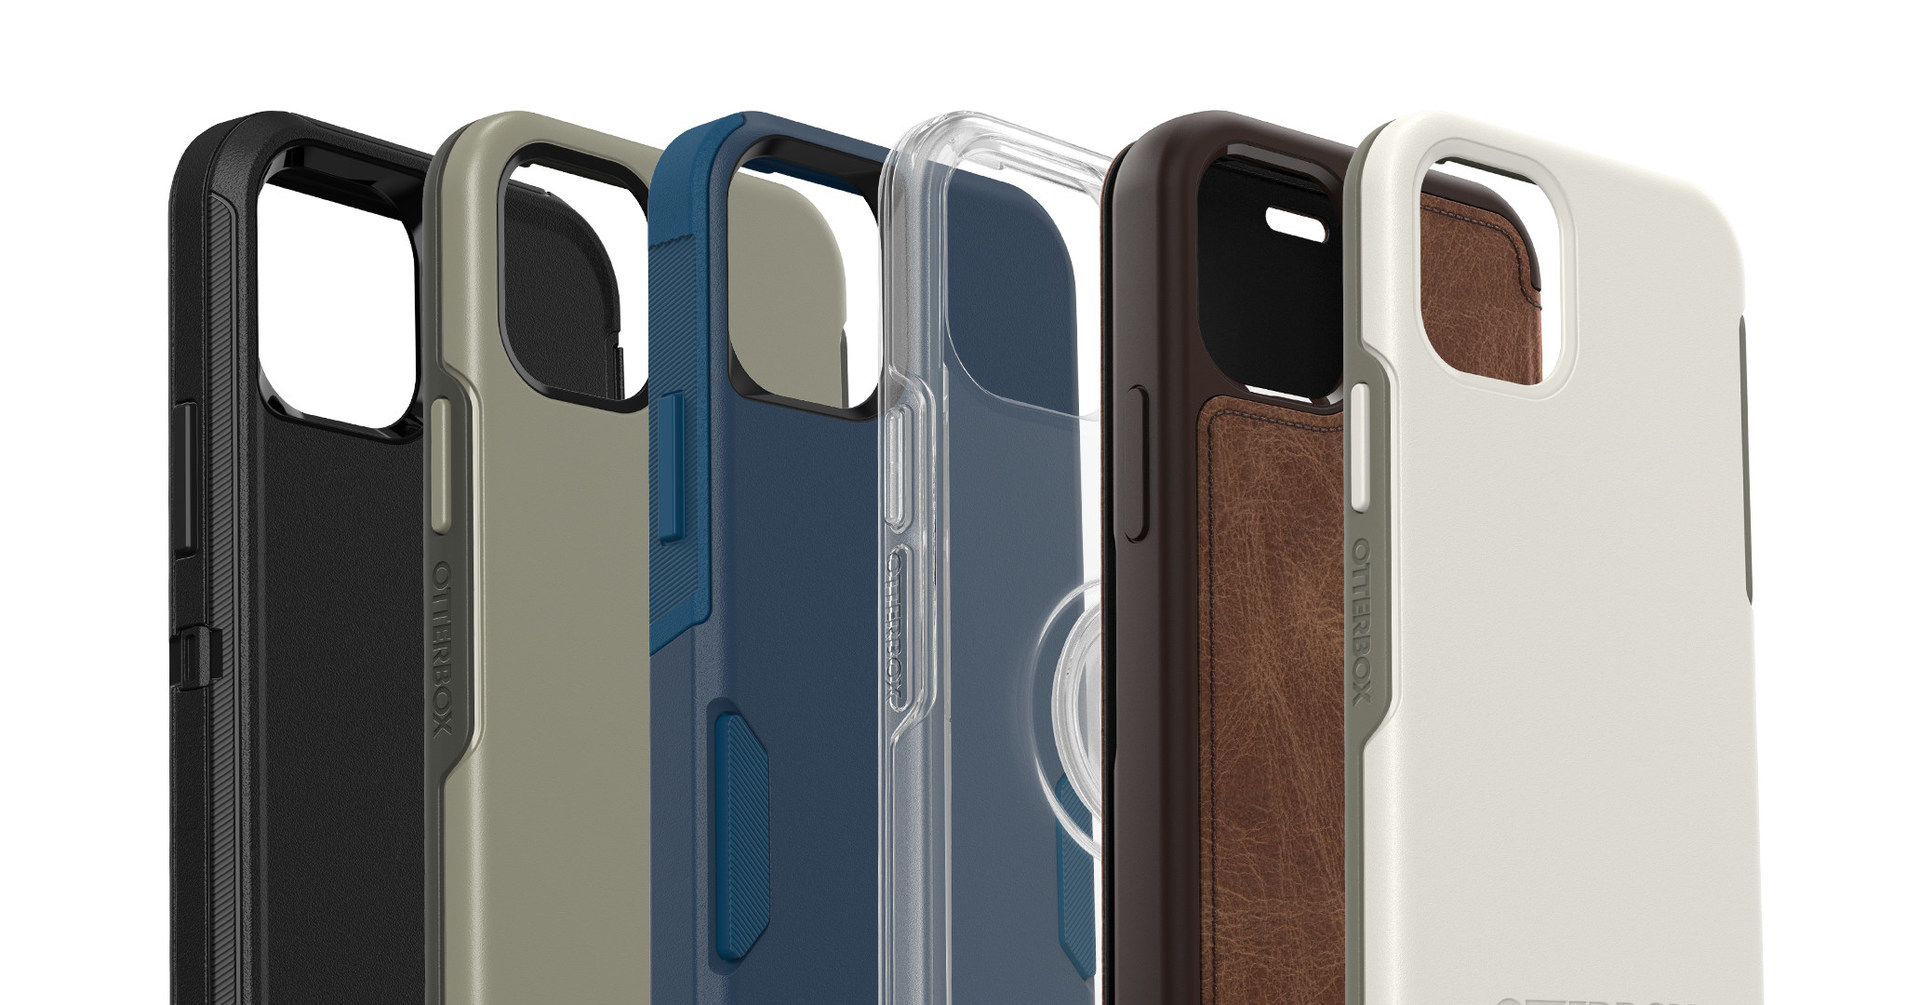 Get Your Otterbox Case For The New Apple Iphone 12 Models And A Chance To Give Back Now Oct 14